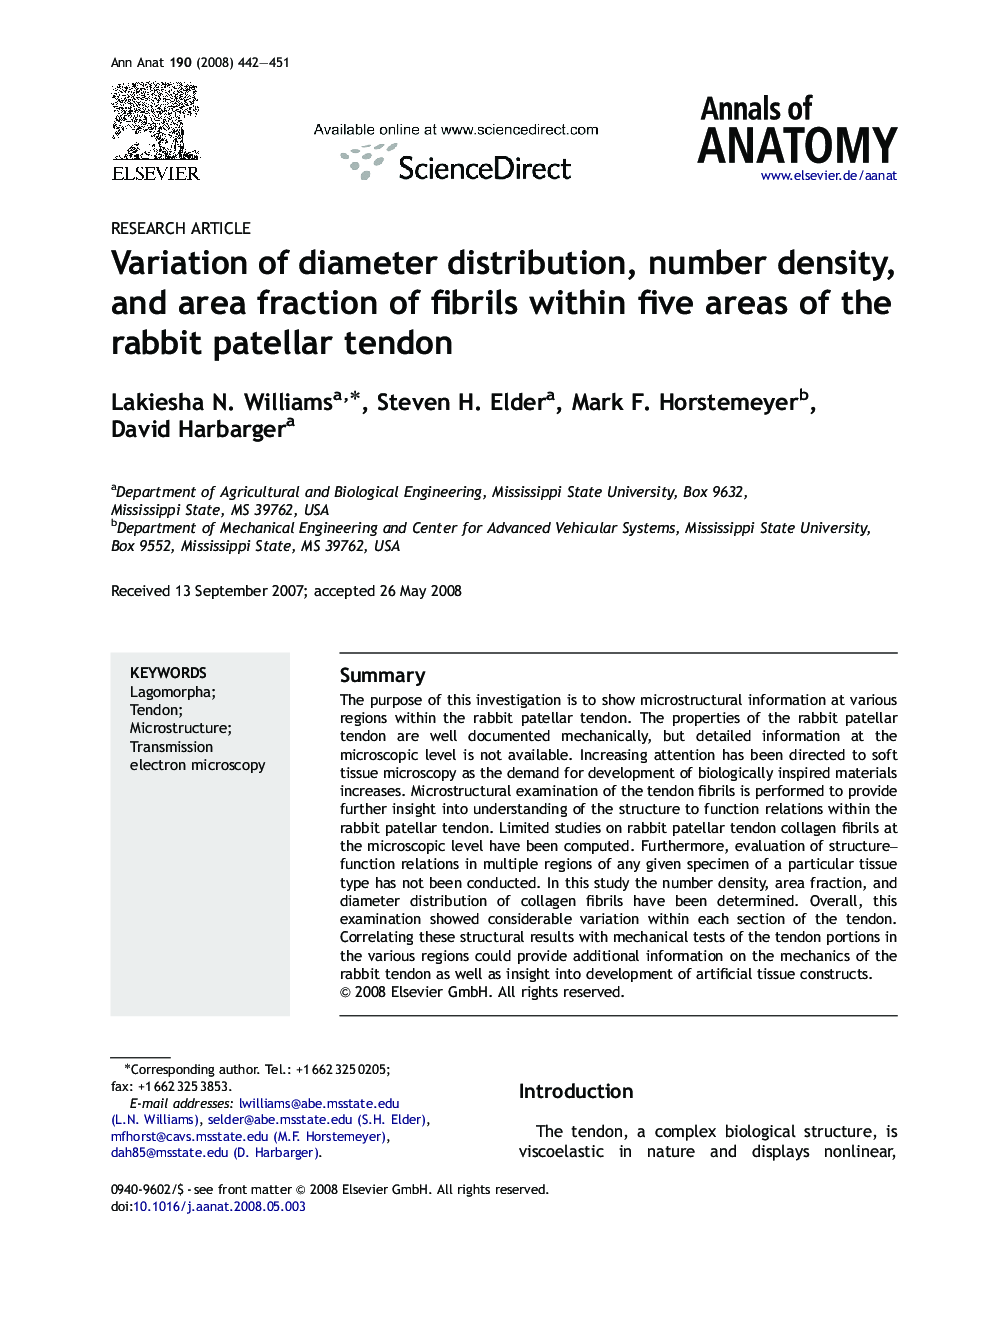 Variation of diameter distribution, number density, and area fraction of fibrils within five areas of the rabbit patellar tendon